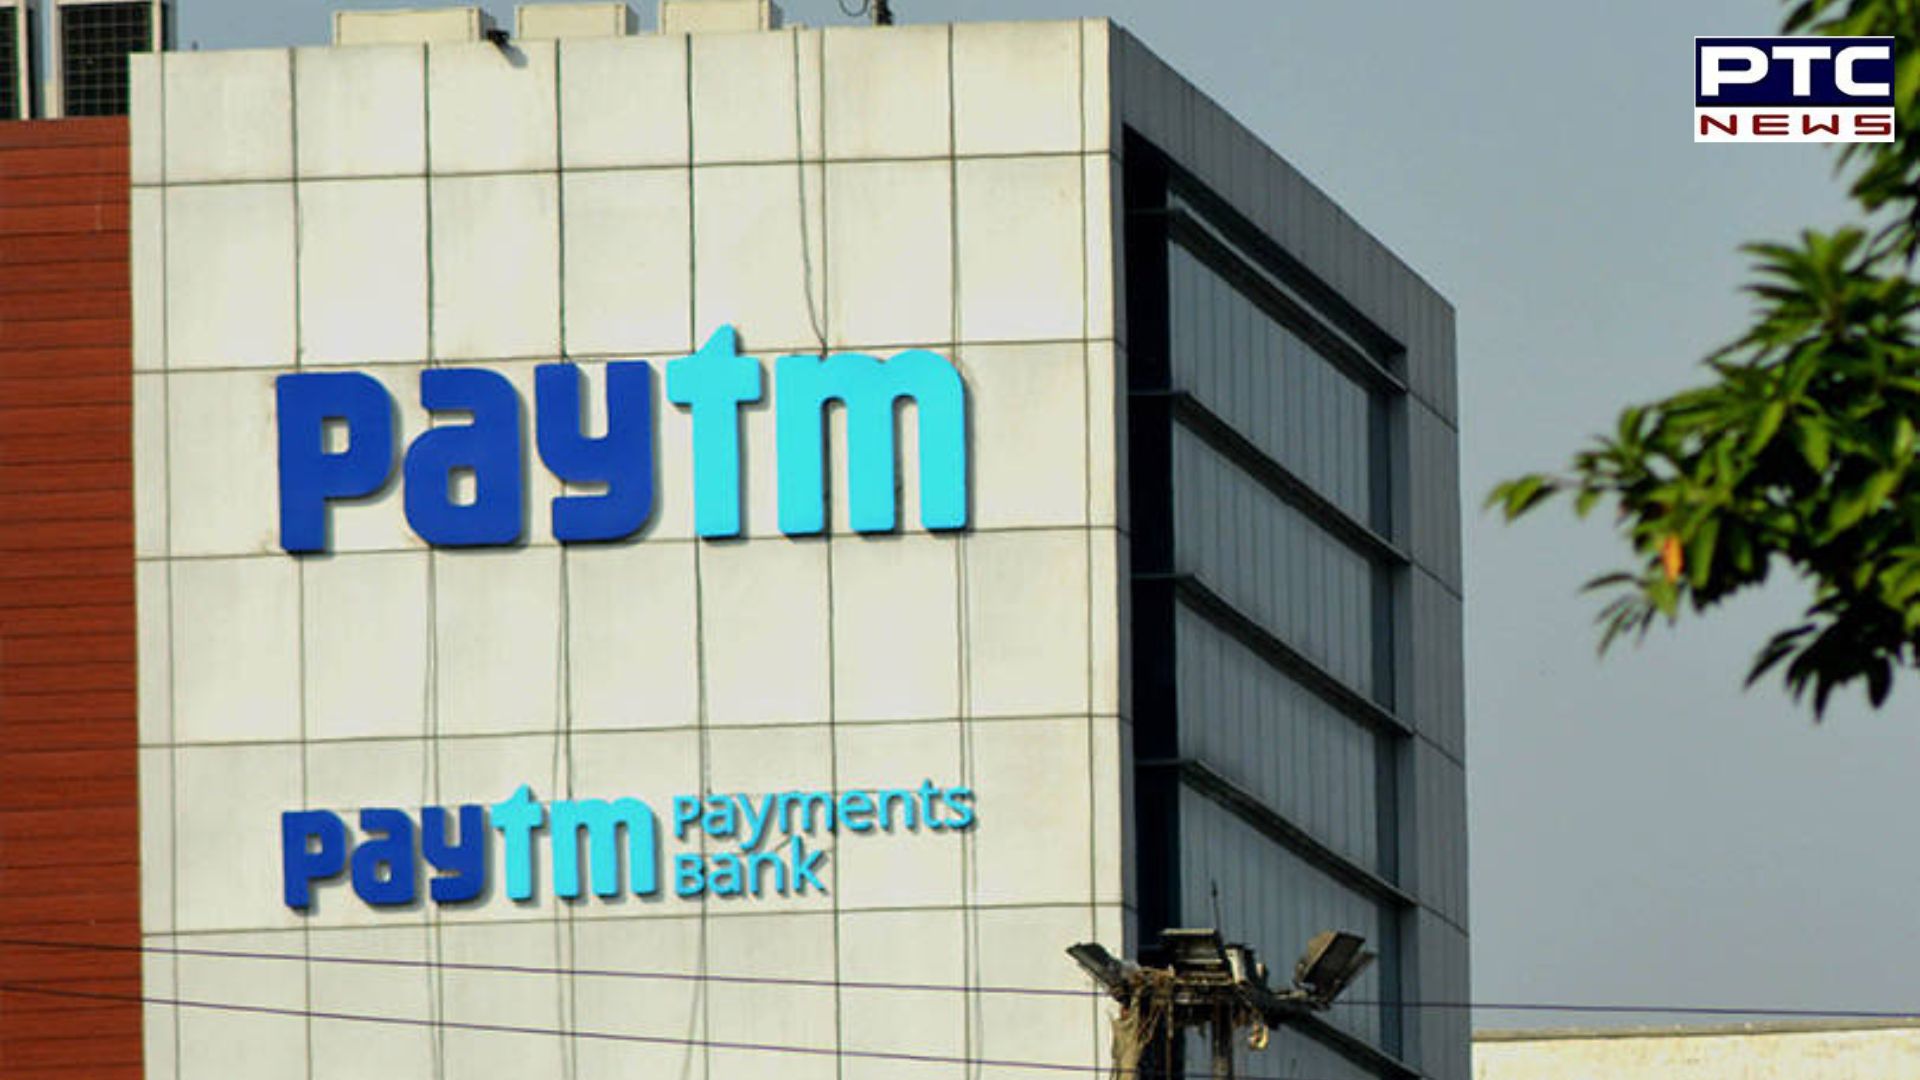 March 15 marks closure of Paytm Payments Bank: Impact on FASTags, UPI, wallet services and more...